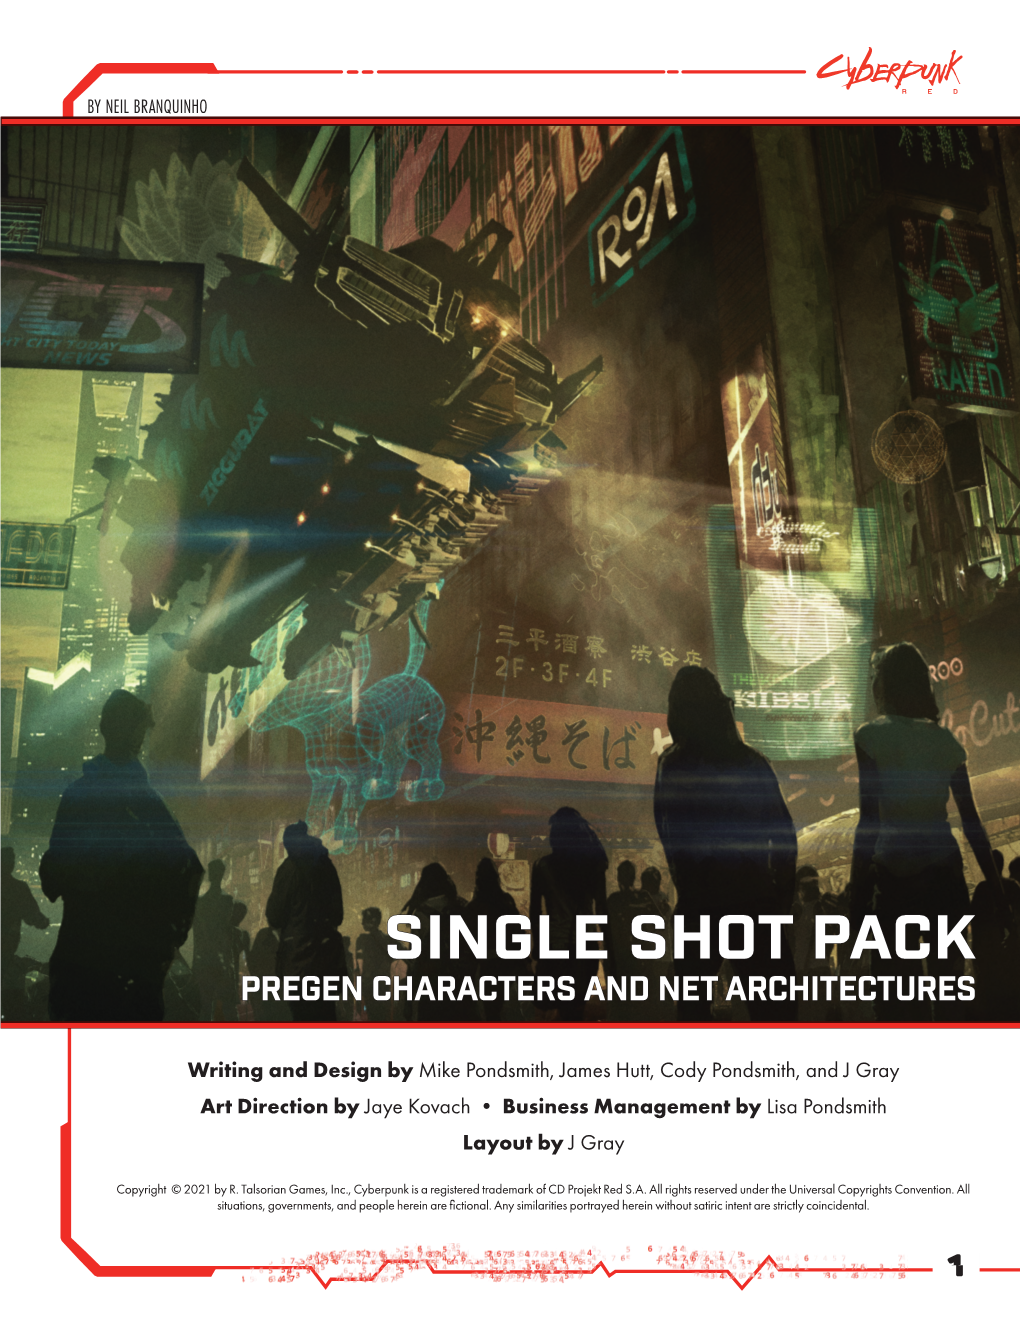 Single Shot Pack Pregen Characters and Net Architectures